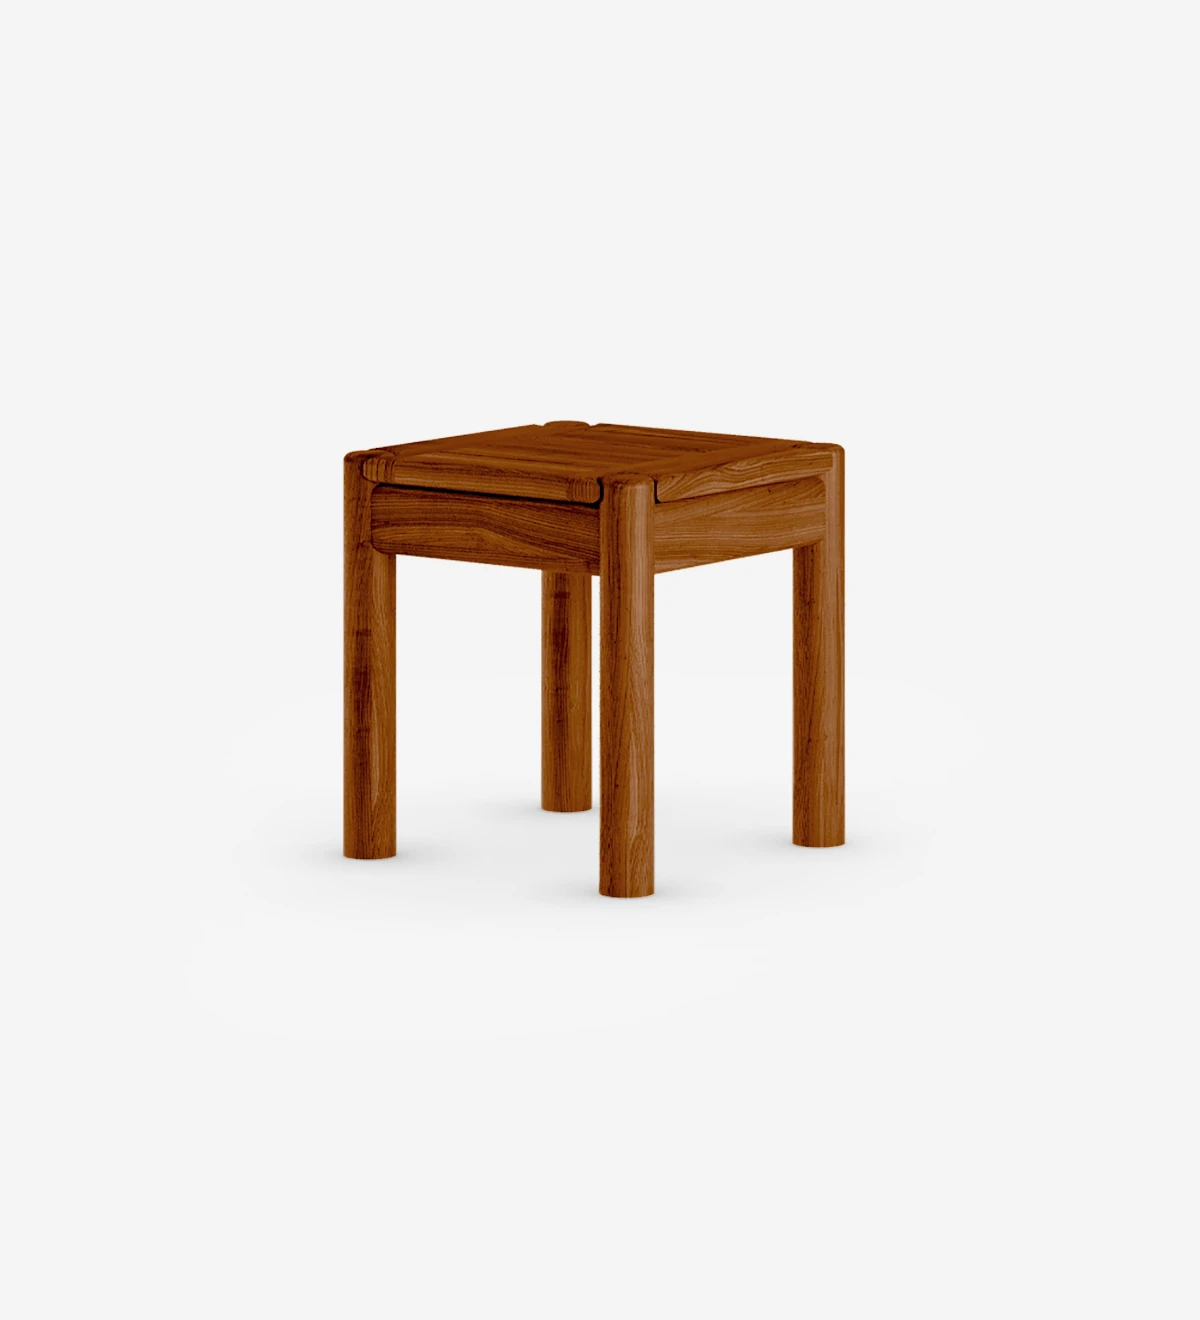 Square side table in honey-colored natural wood.